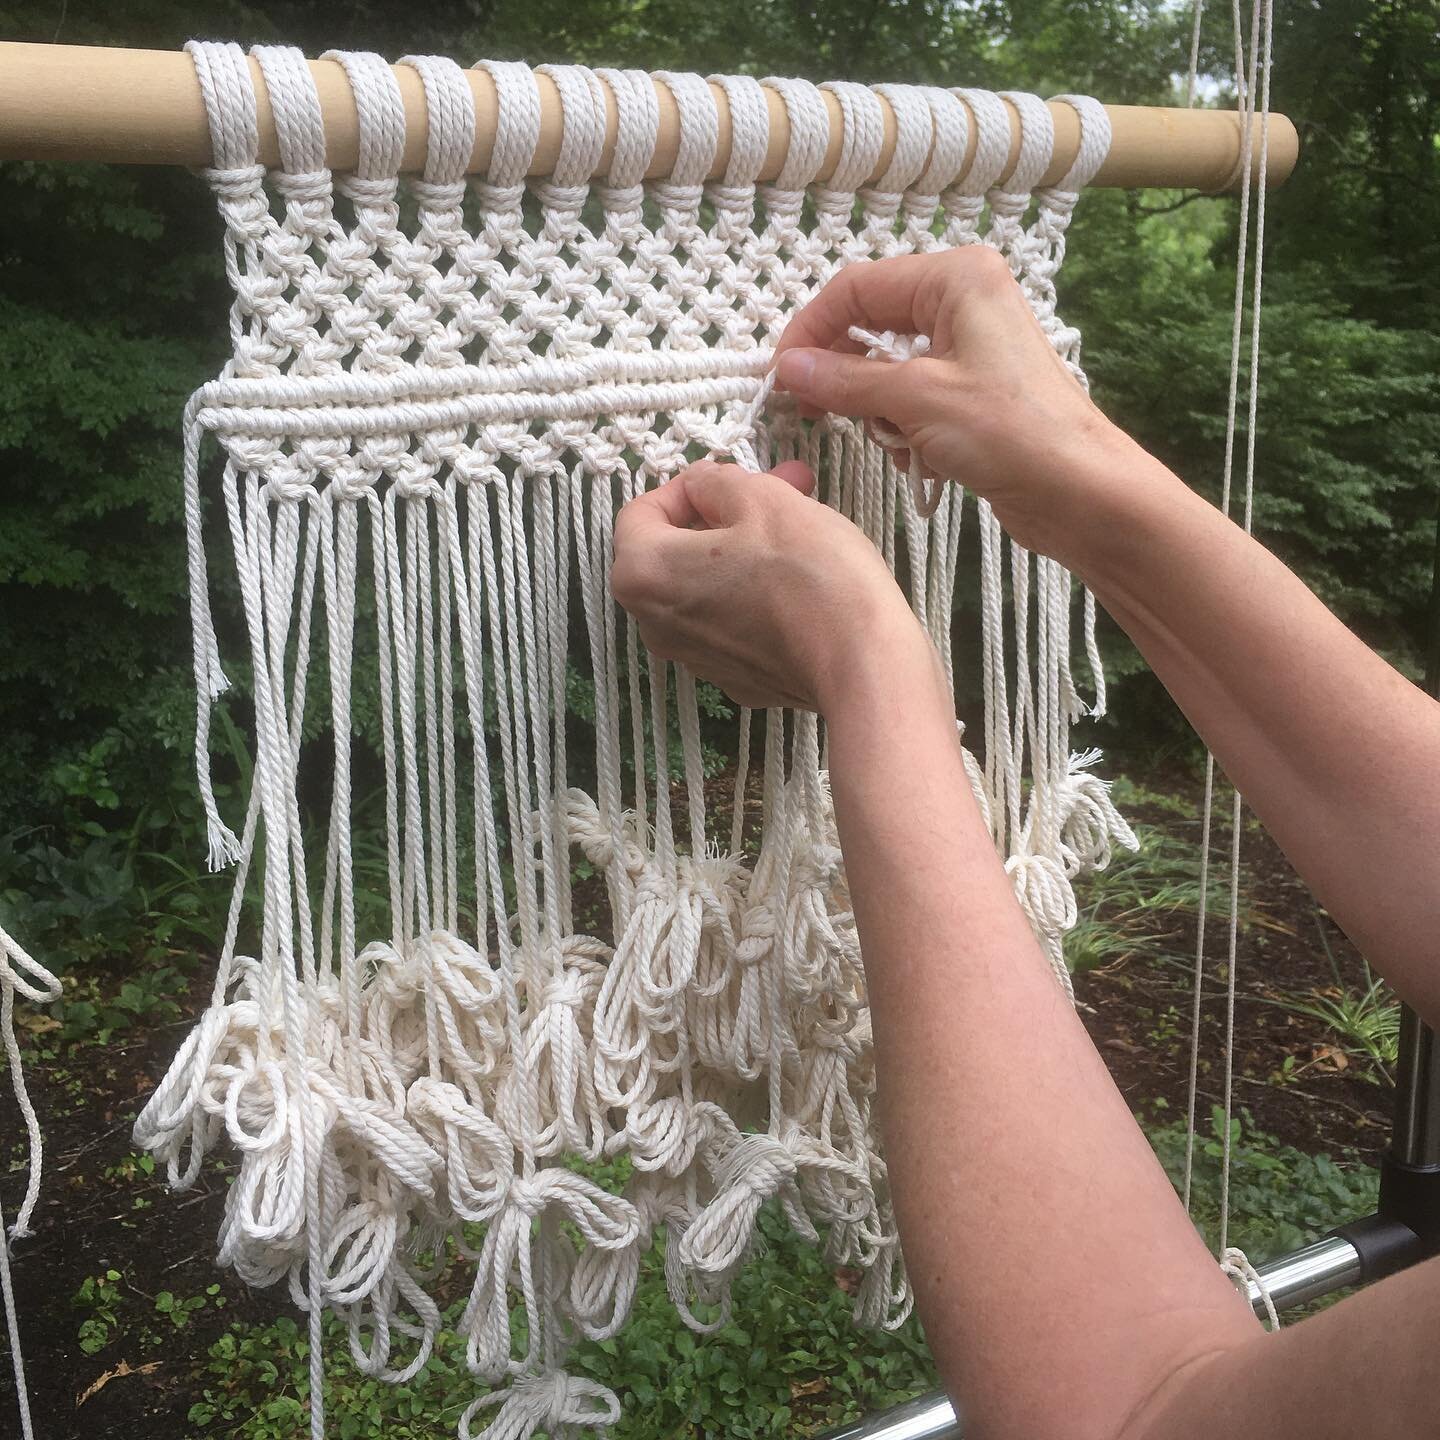 Rediscovering an ancient craft&hellip;hahaha, I mean it IS ancient, but also, unearthing my past--I haven&rsquo;t done this since highschool. 
I am so into macram&eacute; lately, I just love it. I love having a piece going&mdash;it&rsquo;s there and 